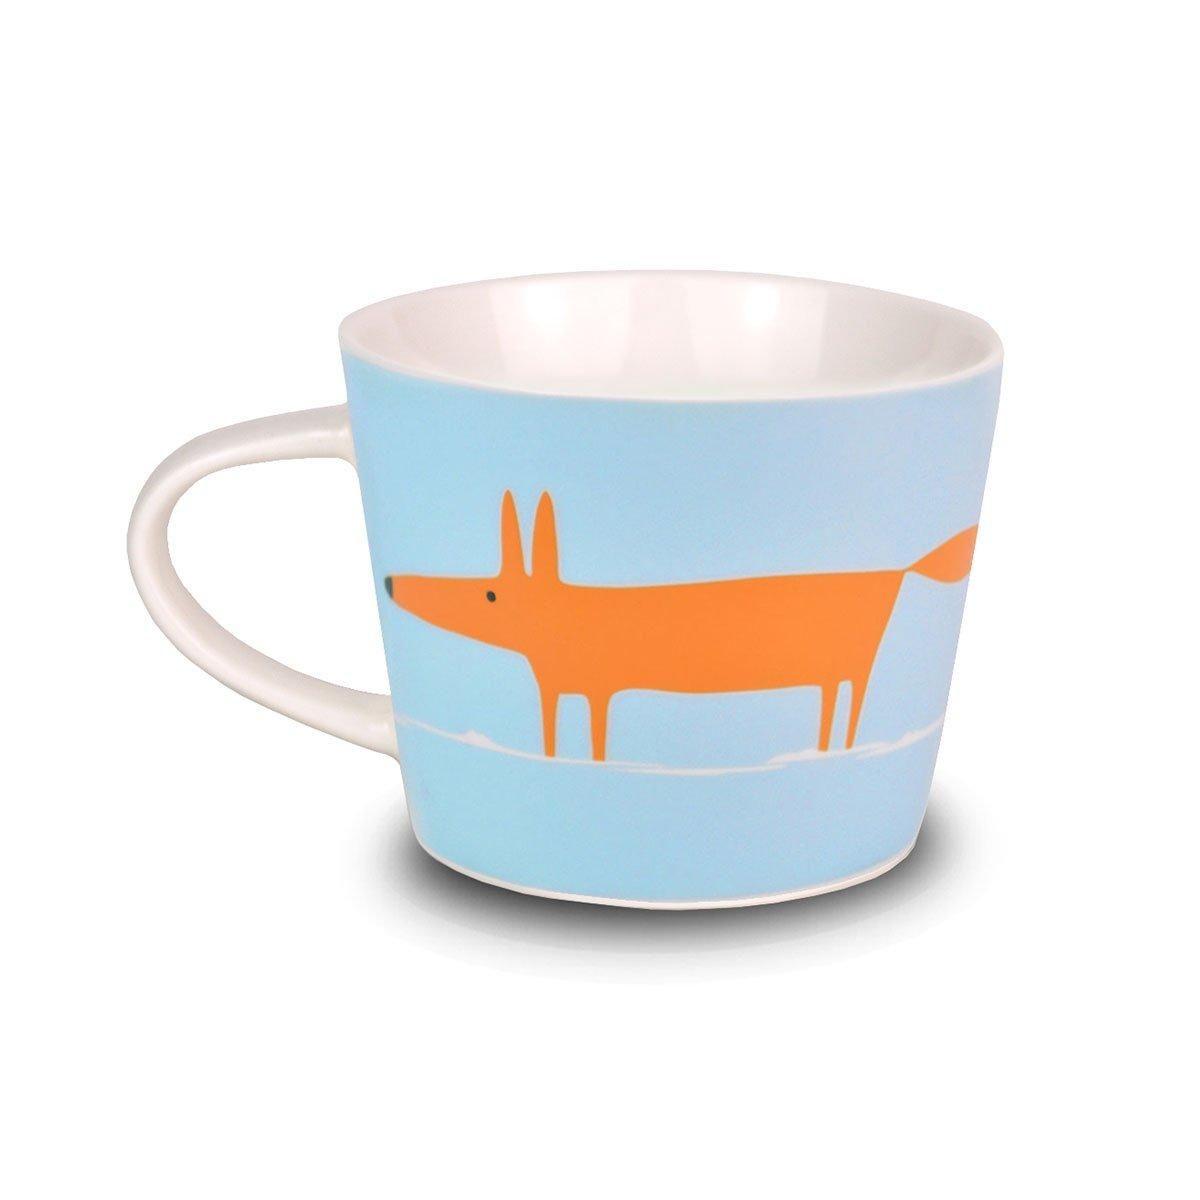  Mugs And Cups SC-0101 